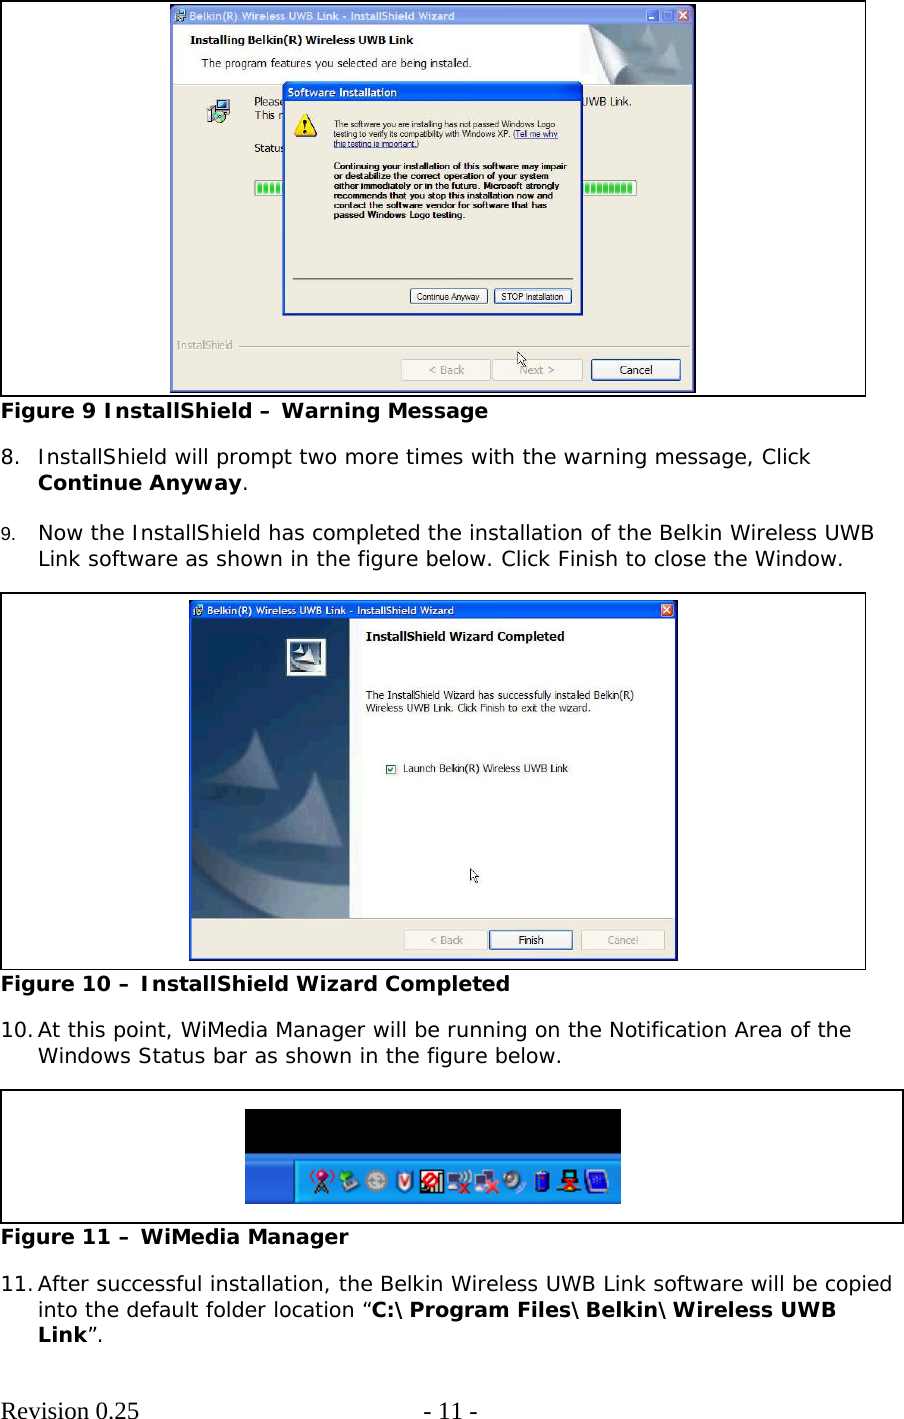        Revision 0.25  - 11 -      Figure 9 InstallShield – Warning Message  8. InstallShield will prompt two more times with the warning message, Click Continue Anyway.  9.  Now the InstallShield has completed the installation of the Belkin Wireless UWB Link software as shown in the figure below. Click Finish to close the Window.   Figure 10 – InstallShield Wizard Completed  10. At this point, WiMedia Manager will be running on the Notification Area of the Windows Status bar as shown in the figure below.   Figure 11 – WiMedia Manager  11. After successful installation, the Belkin Wireless UWB Link software will be copied into the default folder location “C:\Program Files\Belkin\Wireless UWB Link”. 